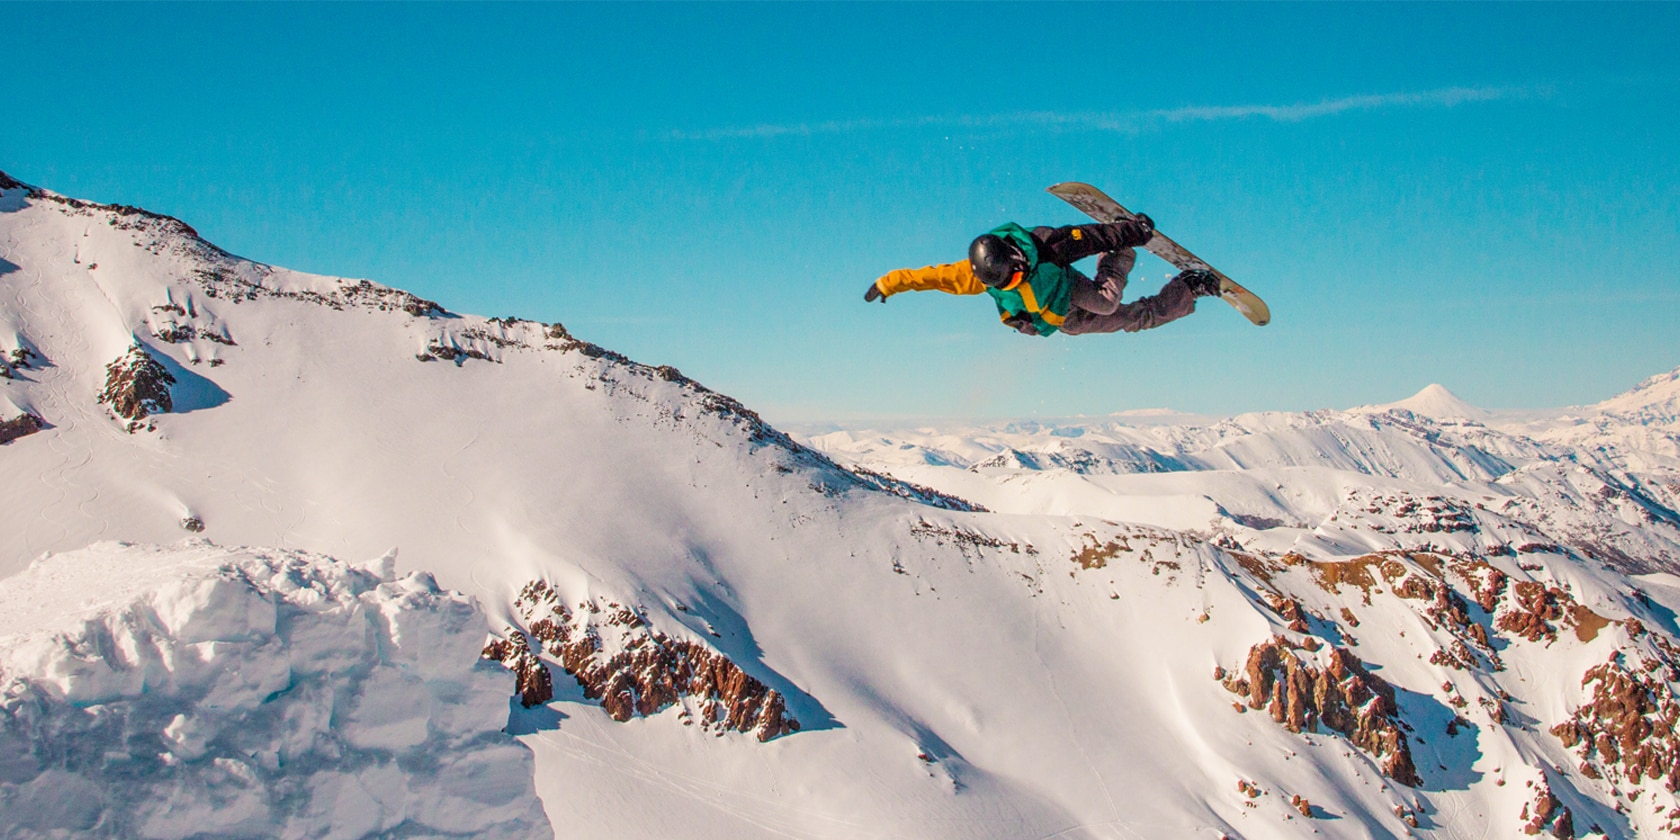 person with green and yellow coat doing flips in the air on a snowboard in front of a mountain background